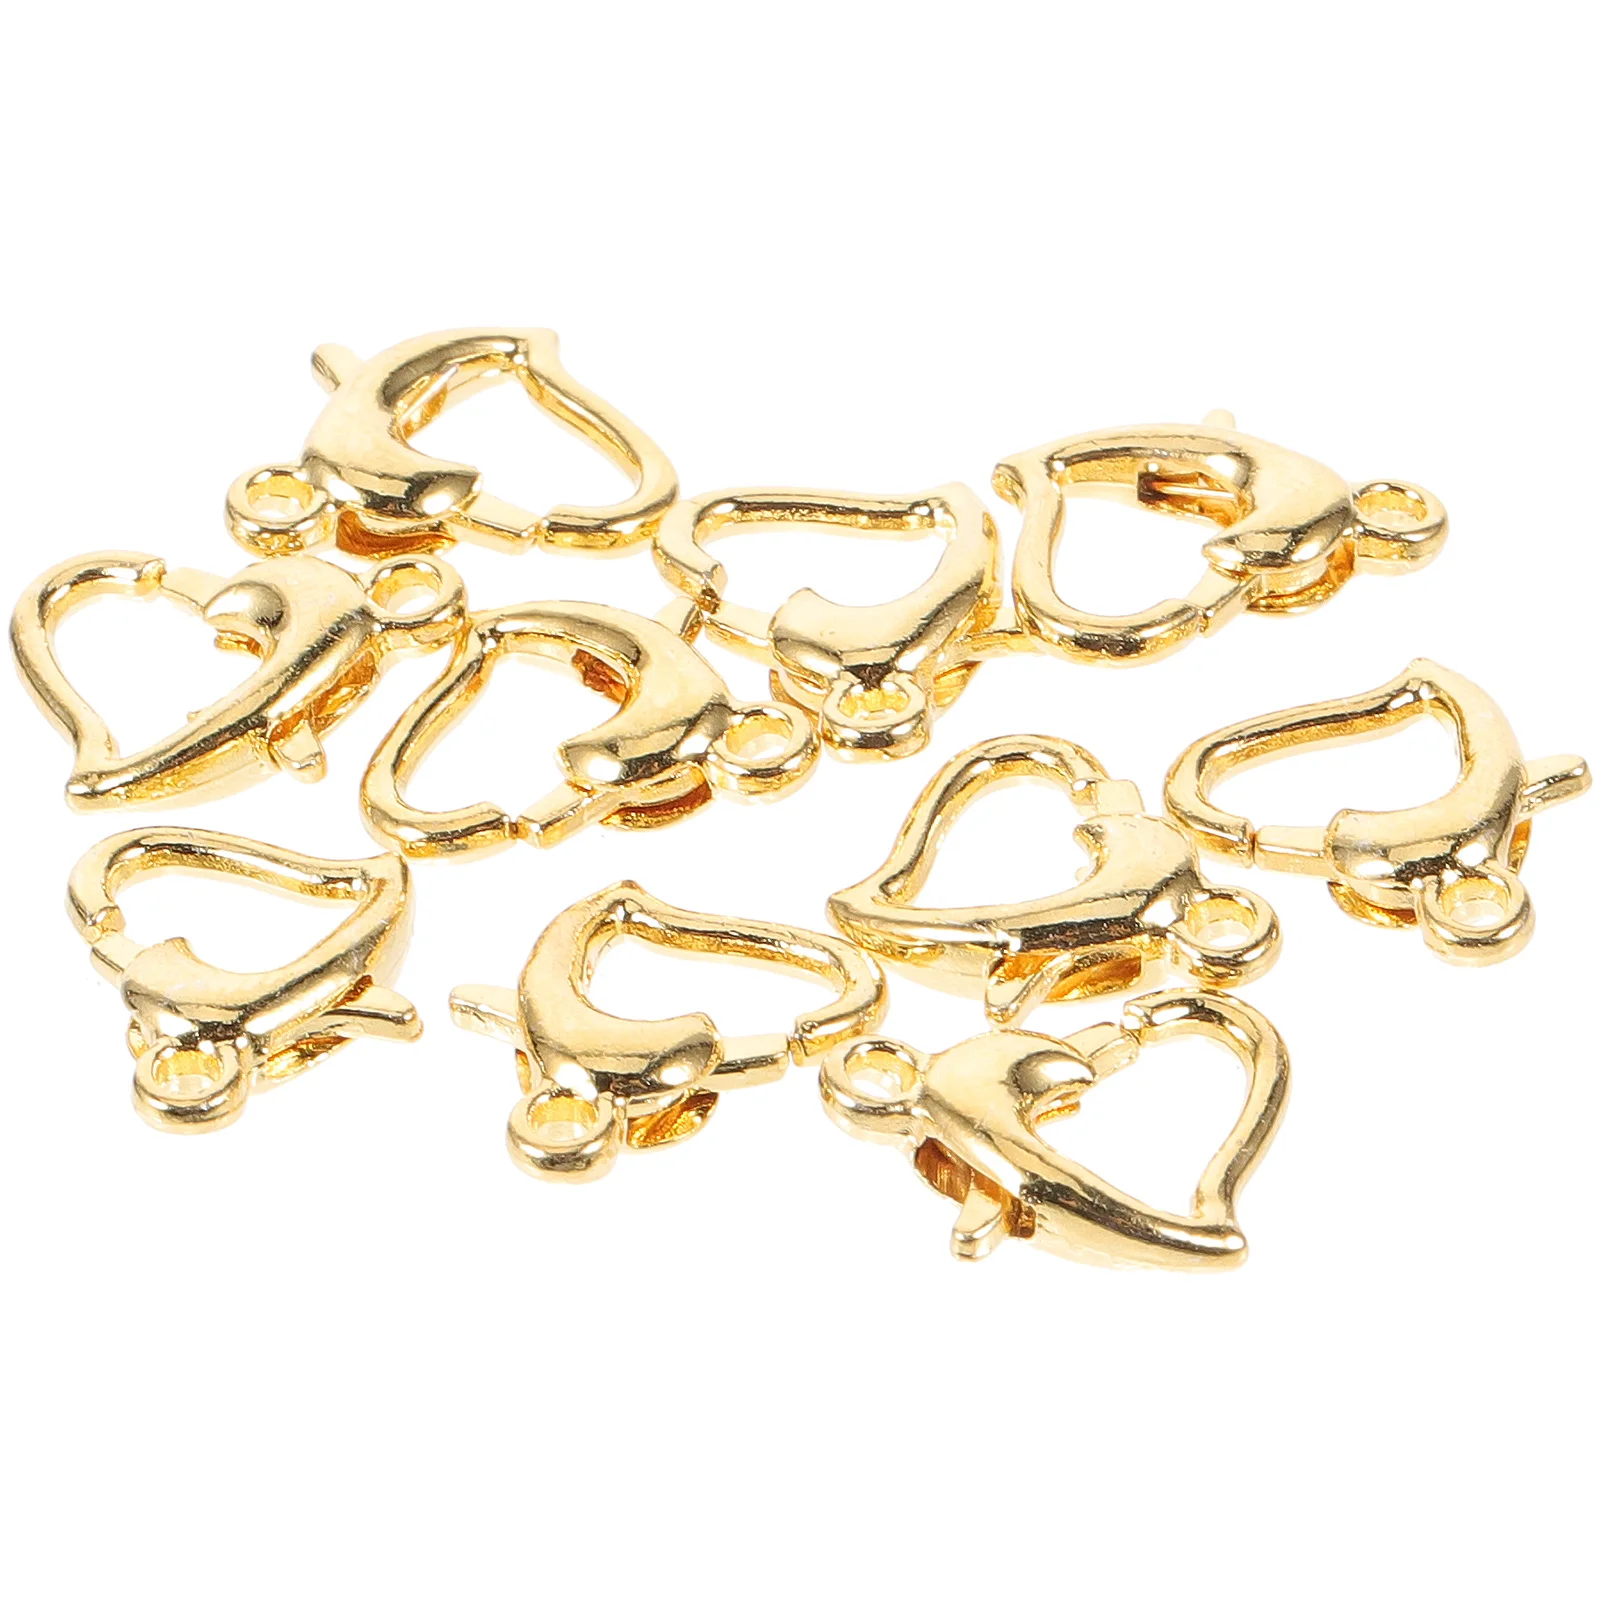 

10 Pcs Bracelets Crafting Supplies Clasps Jewelry Making Metal Necklace Buckle Connecting DIY